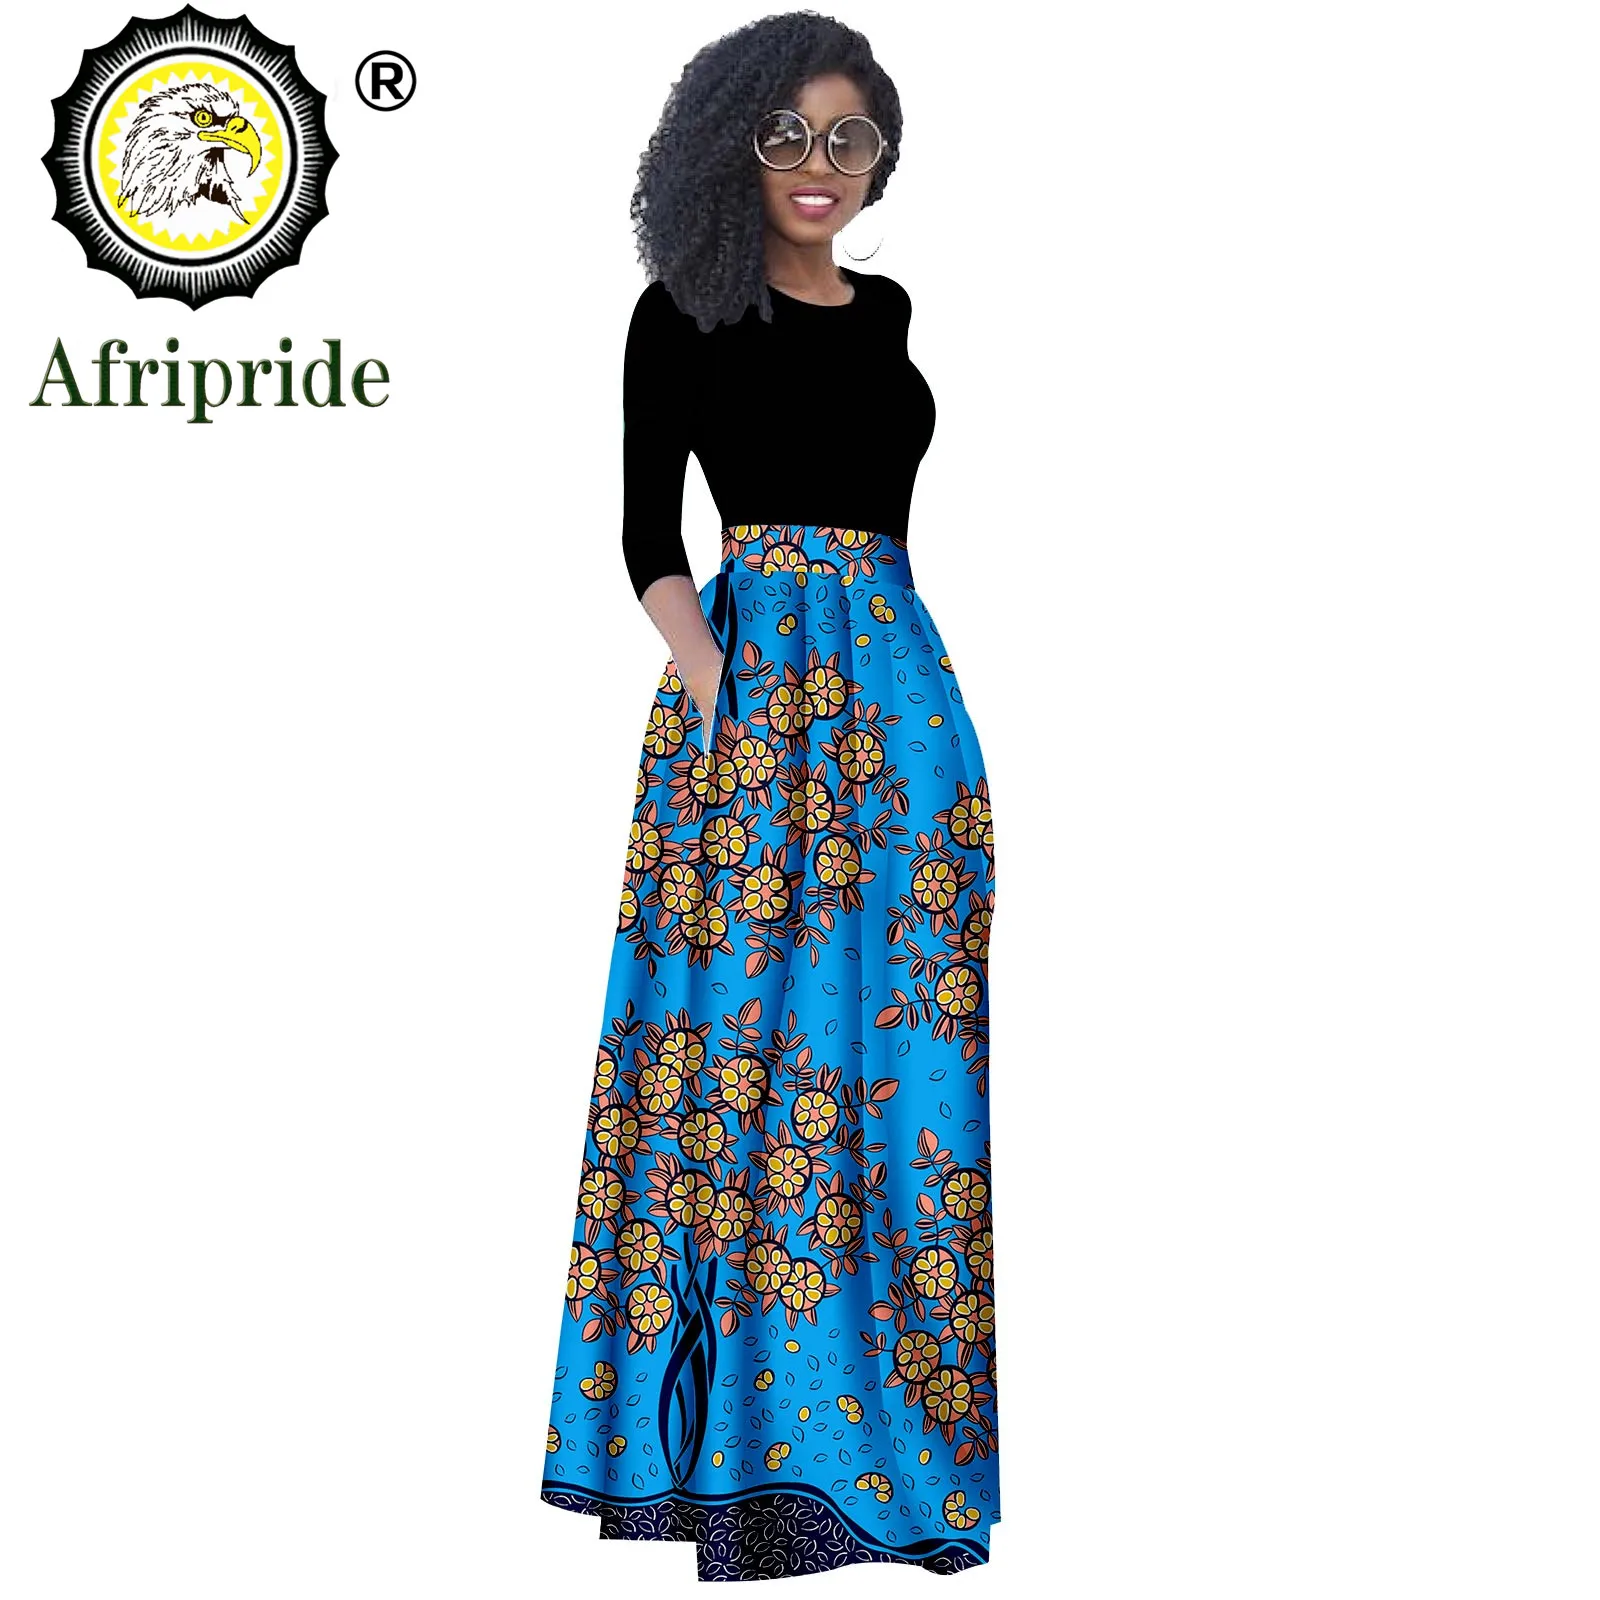 African Women Clothes Fashion Skirt Ankara Wax Skirt Traditional Clothing Print High Waist Long Maxi Skirt Plus Size S1827004 new casual fashion african ethnic solid color men s casual suit jacket pants ropa hombre roupas maculinas 반바지 men clothing